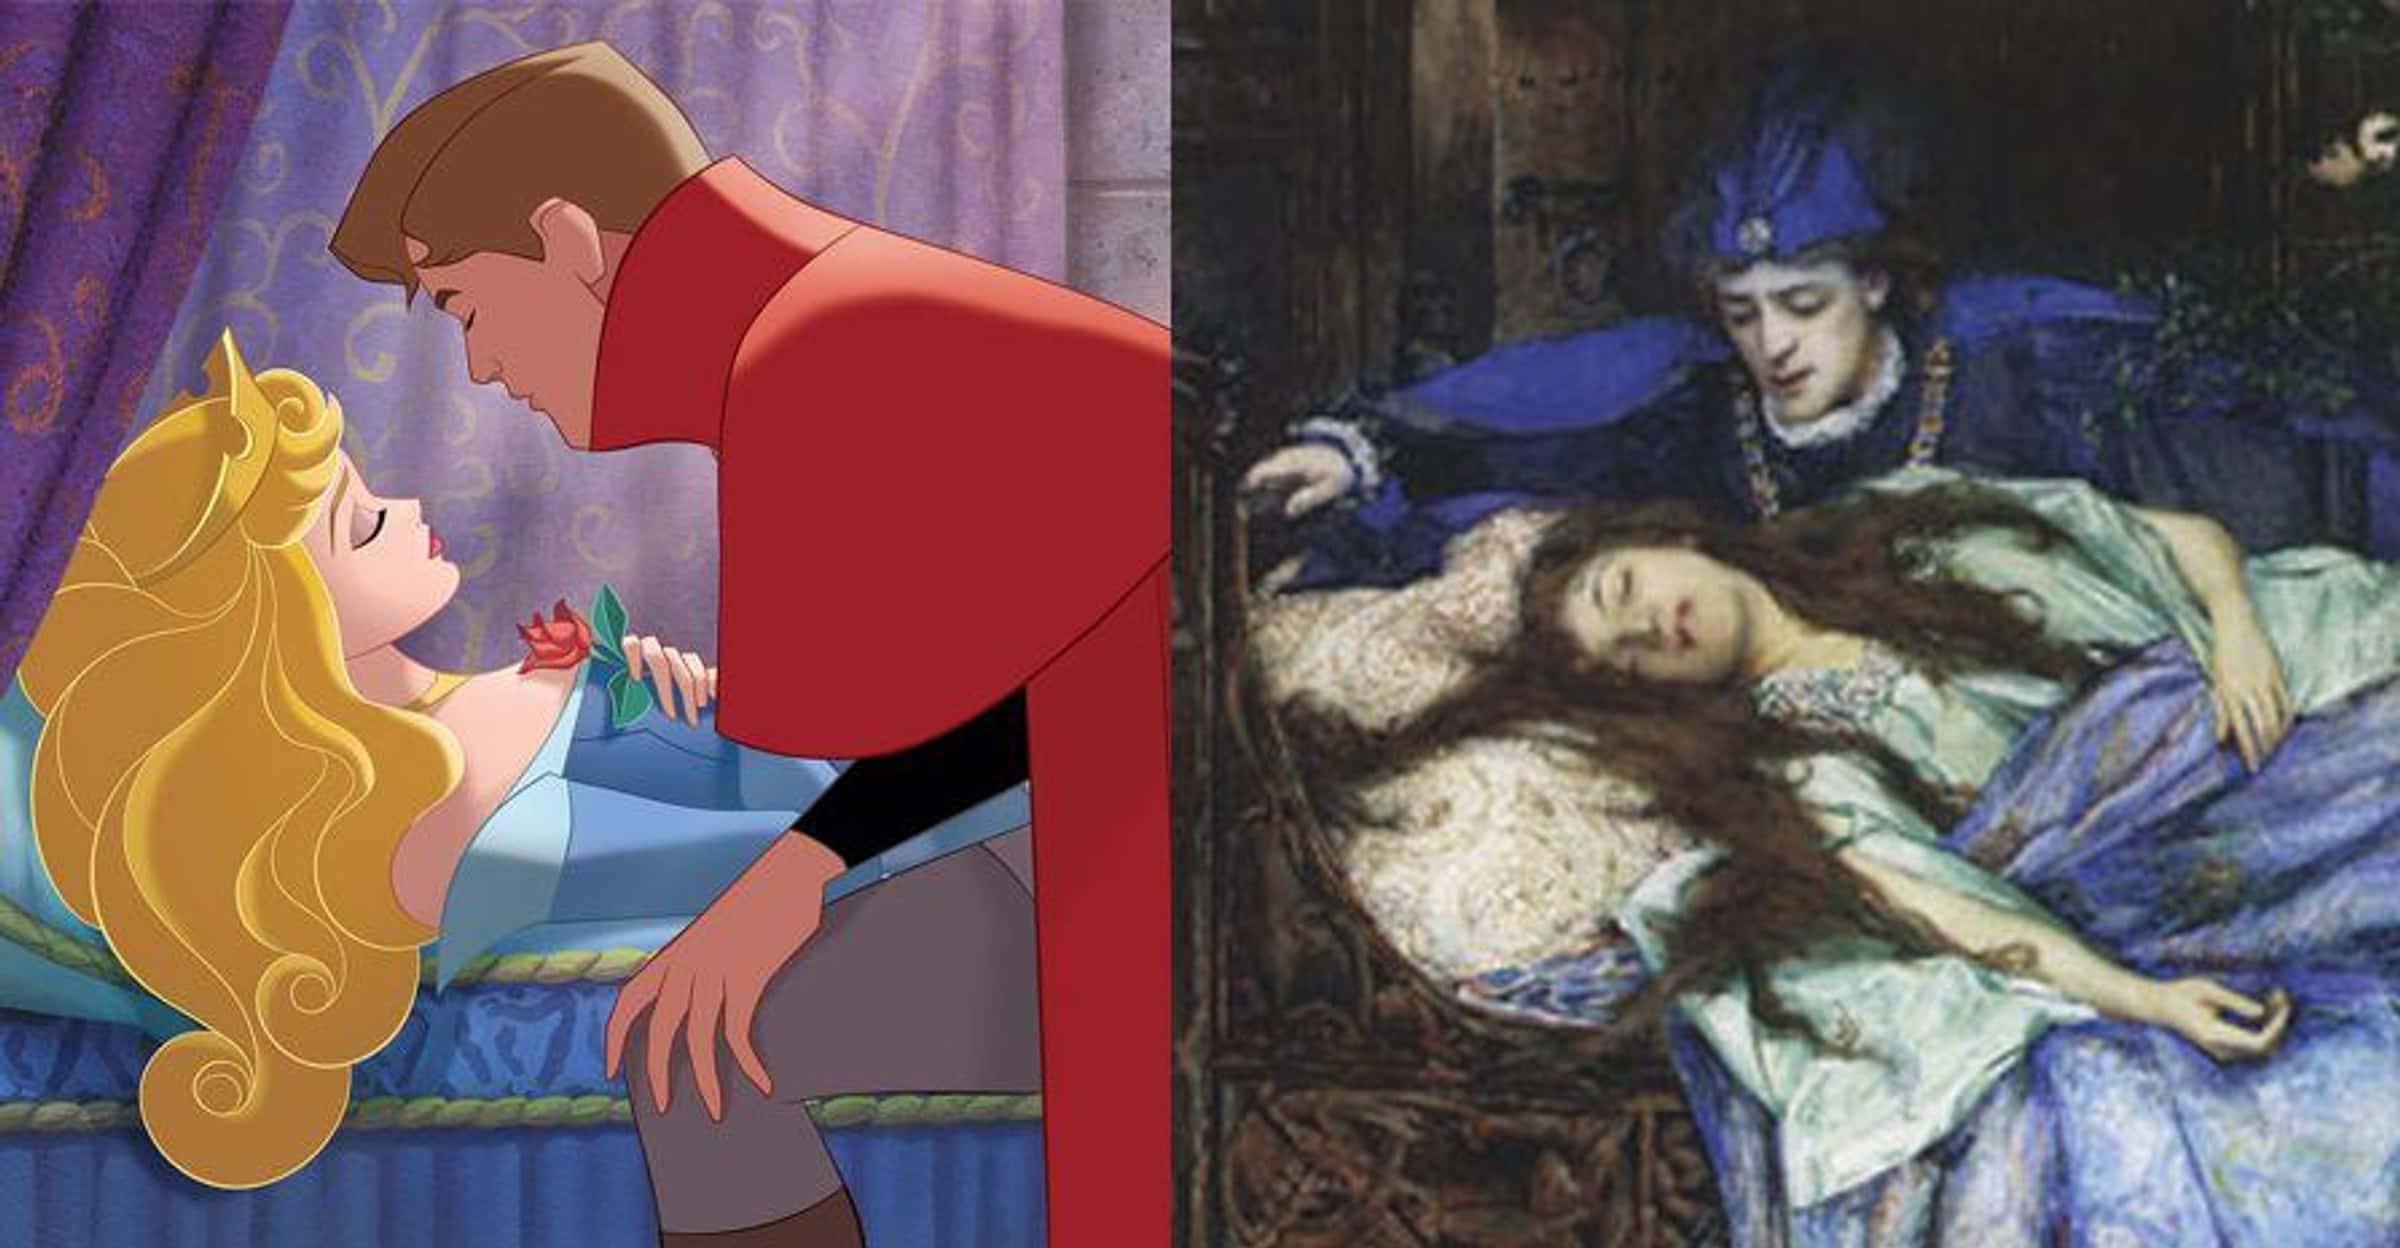 Sleeping Beauty Cartoon Porn Pregnant - In The Original Sleeping Beauty, The King Is A Sexual Harasser Who Forces  Himself On The Princess